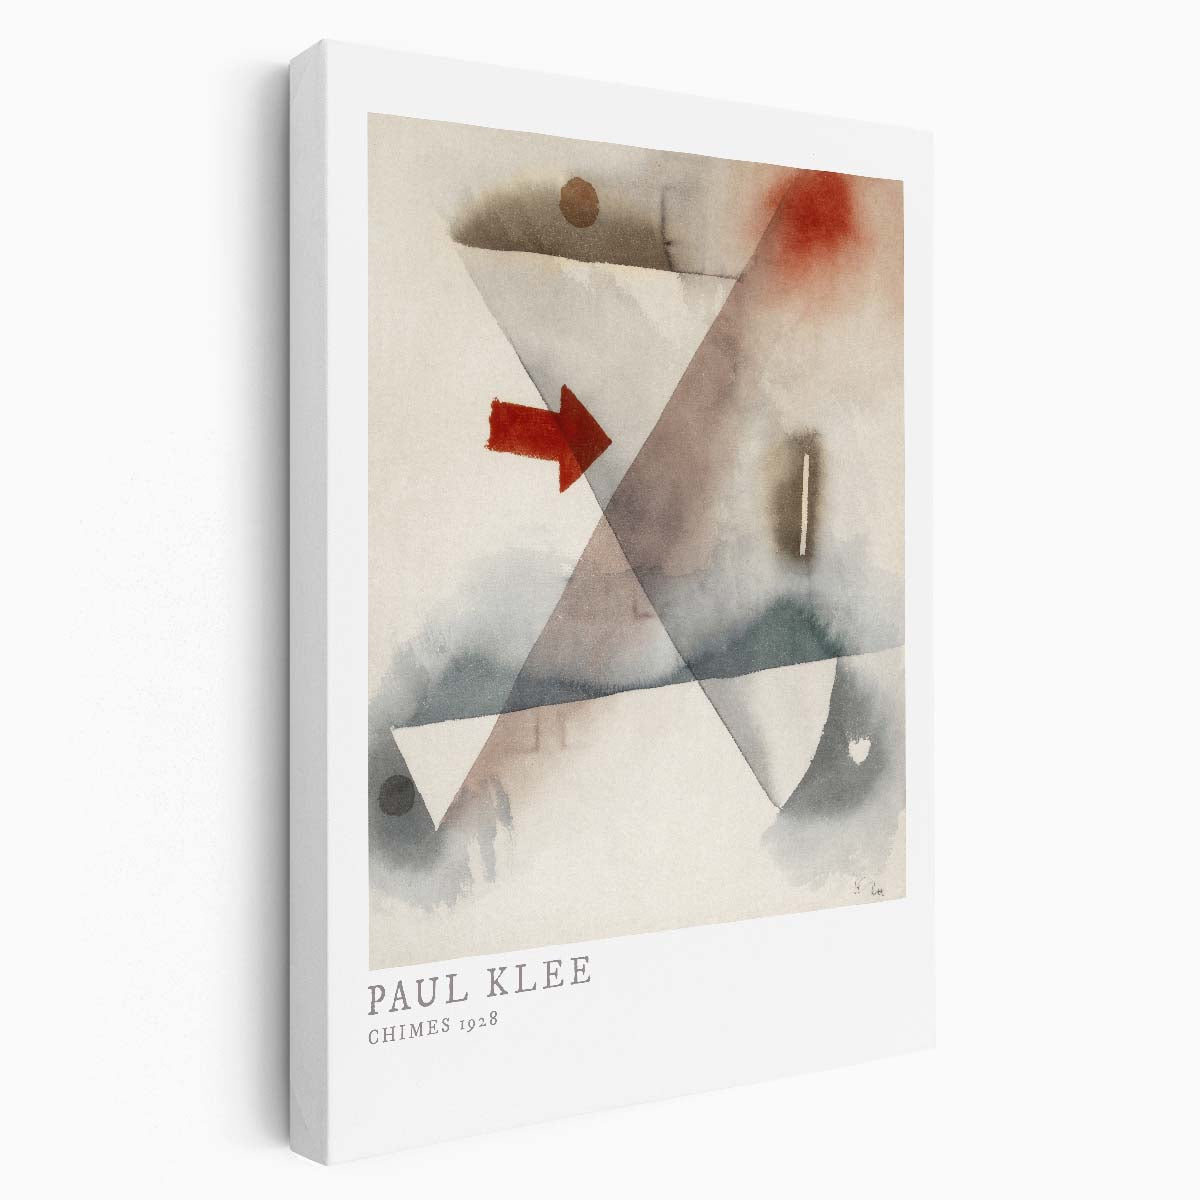 Paul Klee's 1928 Chimes Watercolor Illustration - Abstract Modern Masterpiece by Luxuriance Designs, made in USA